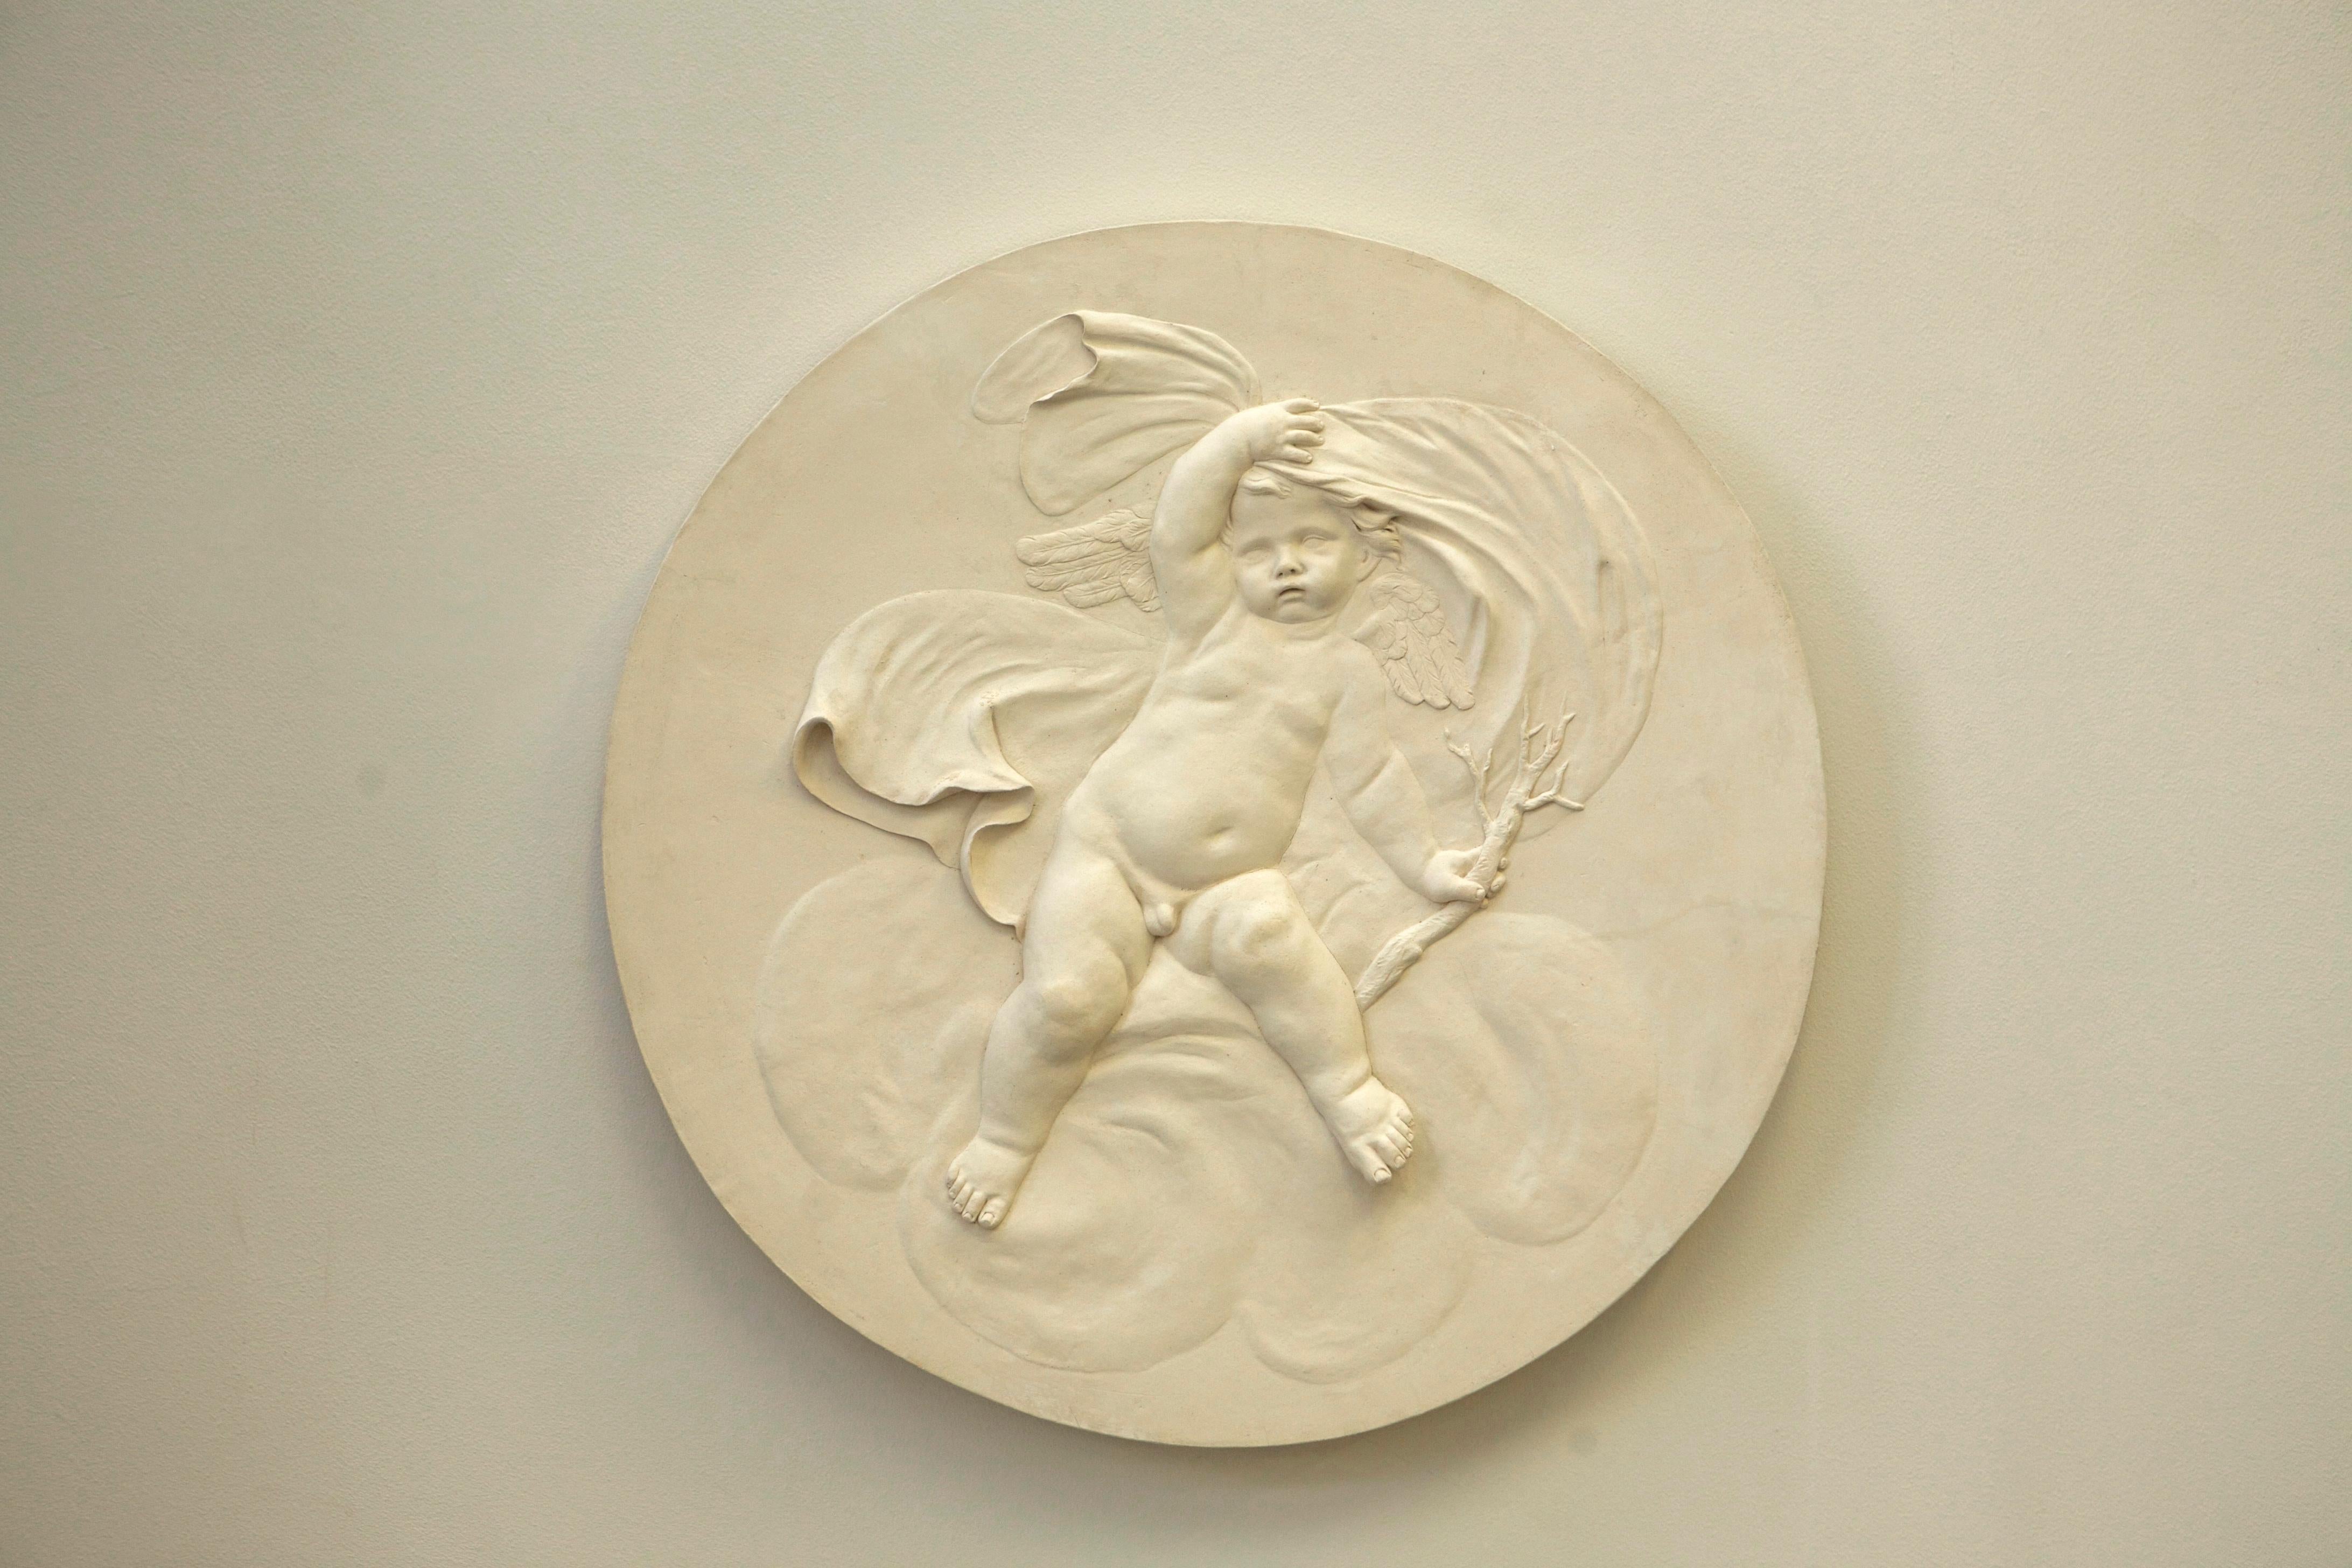 Coade Studio decorative roundel depicting 'Winter' cherub, draped and holding a bear branch/twig. Modelled in delicate low relief. The four seasons roundels are influenced by the 18th century Coade designs.

This is made from Coade Stone and is